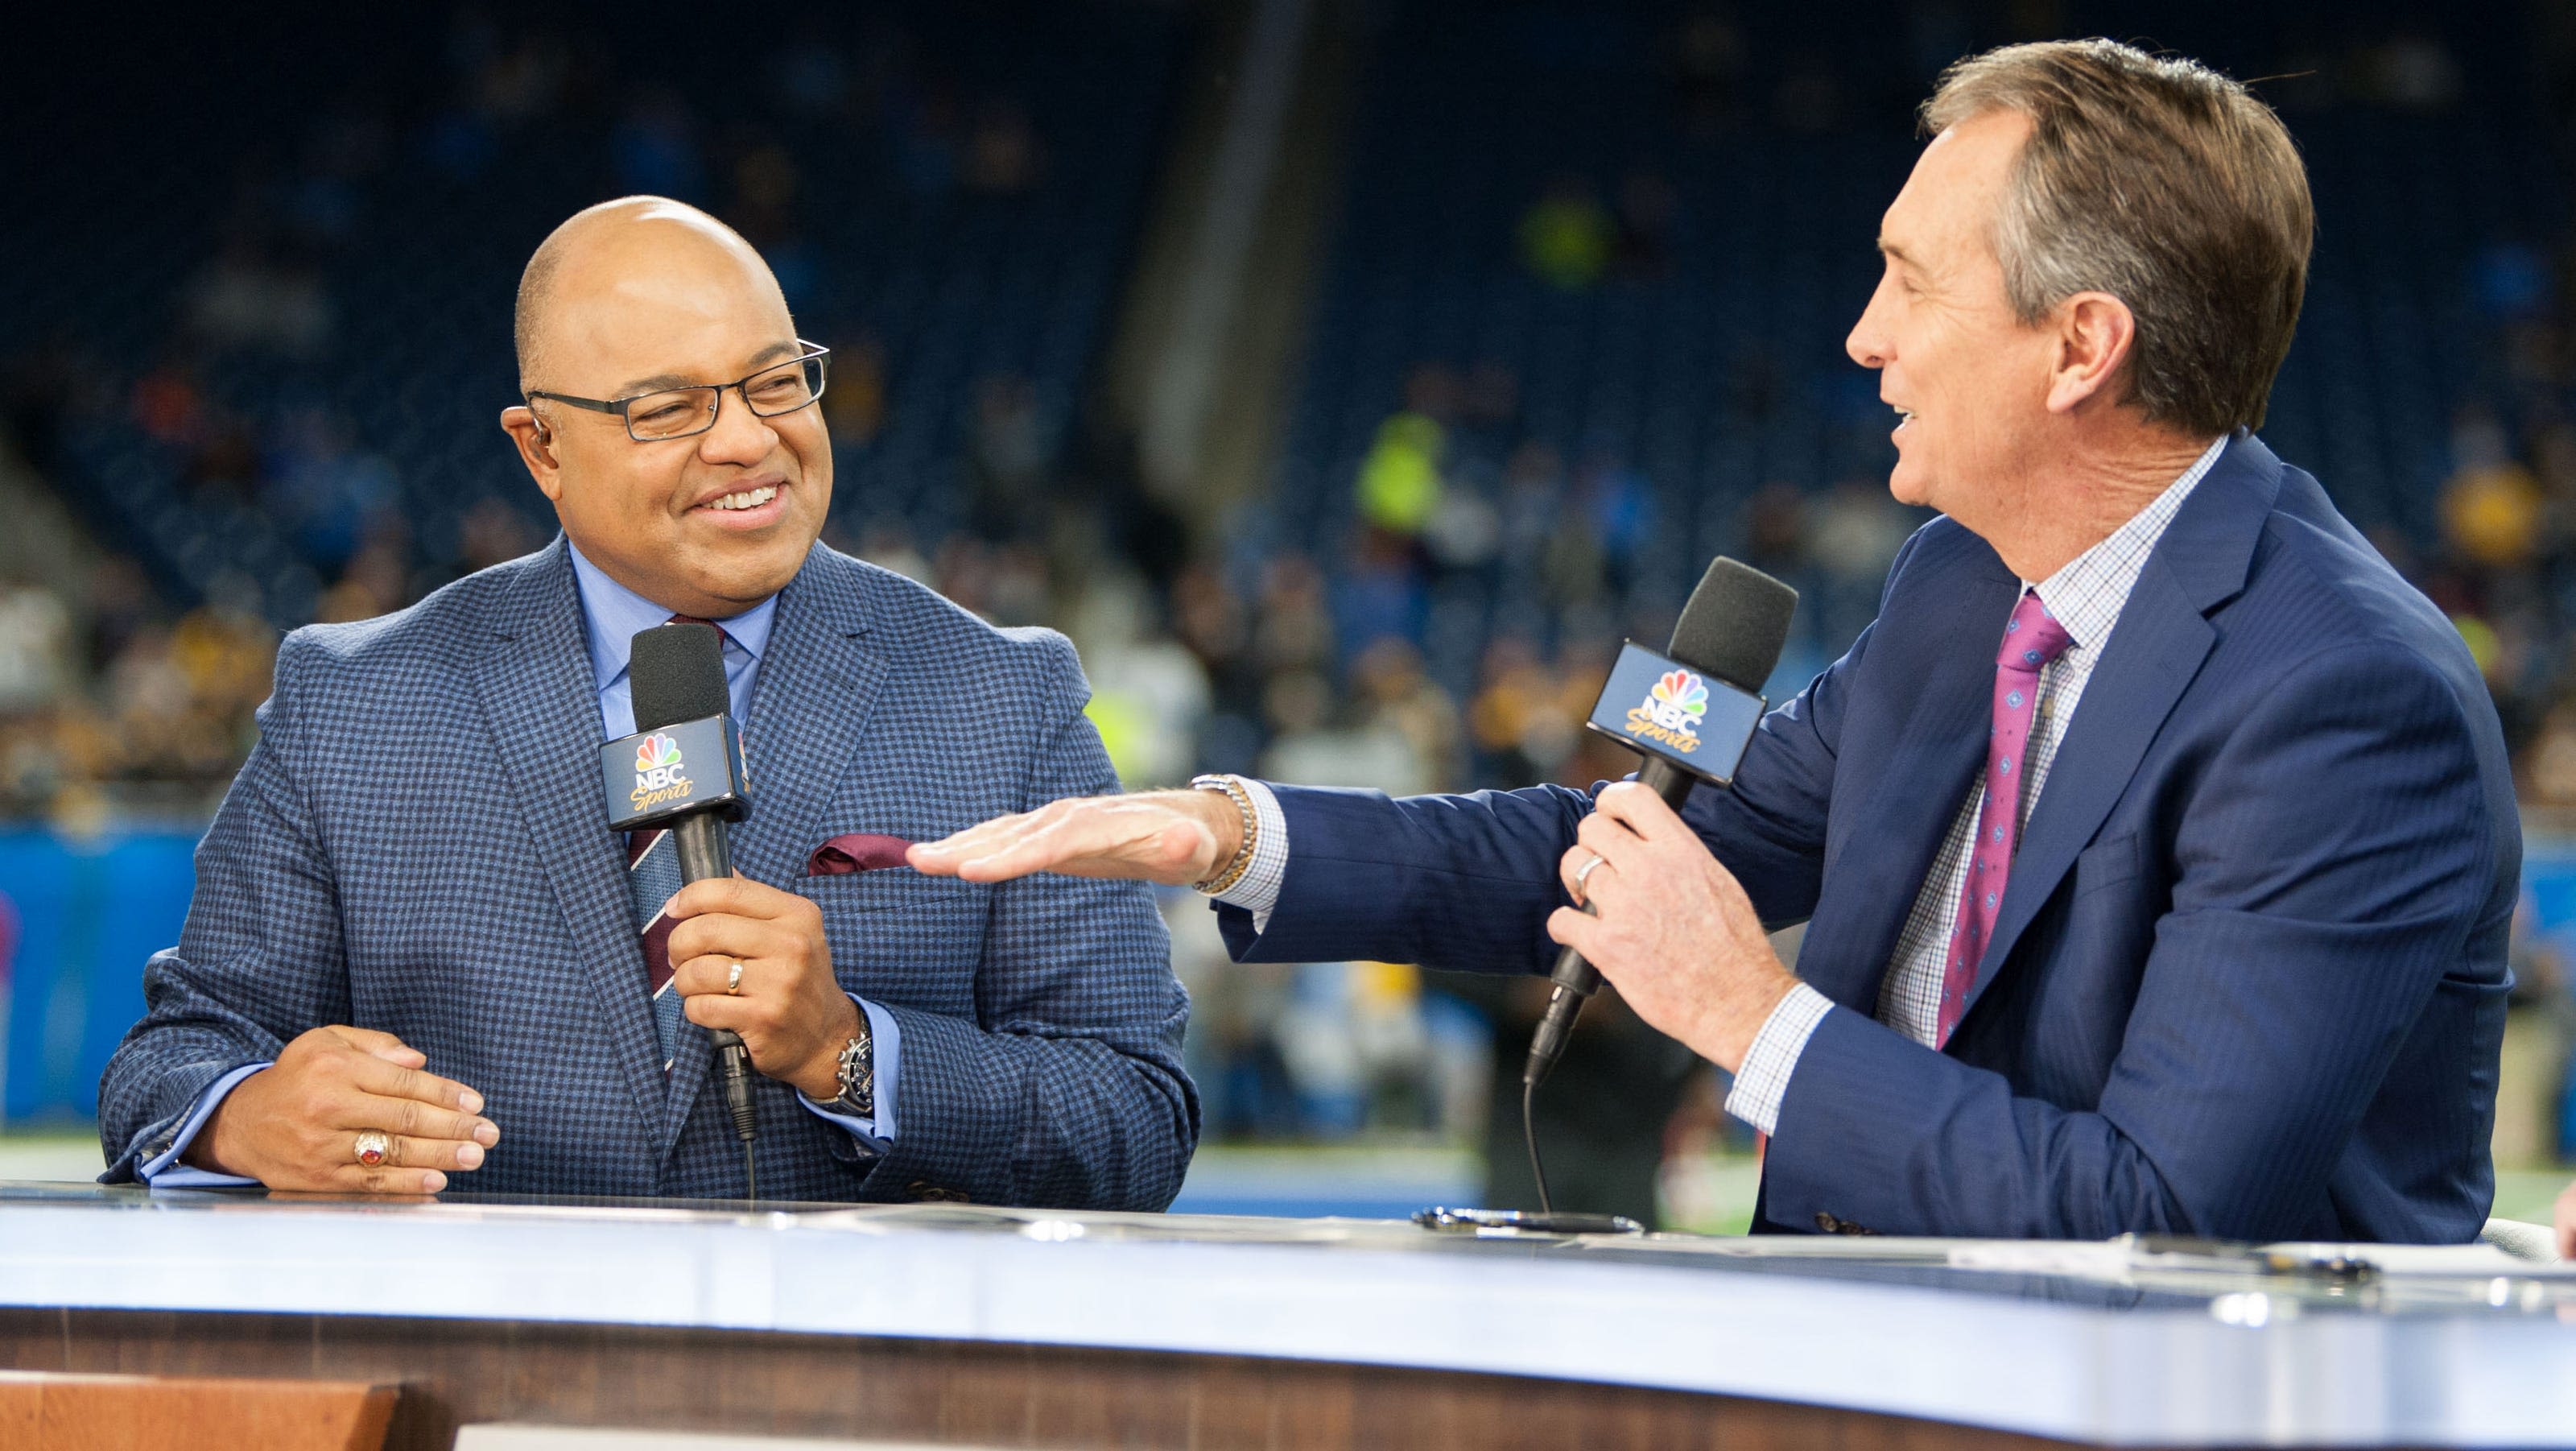 Mike Tirico to host Olympics for 4th time on NBC: What to know of 2024 Paris broadcaster